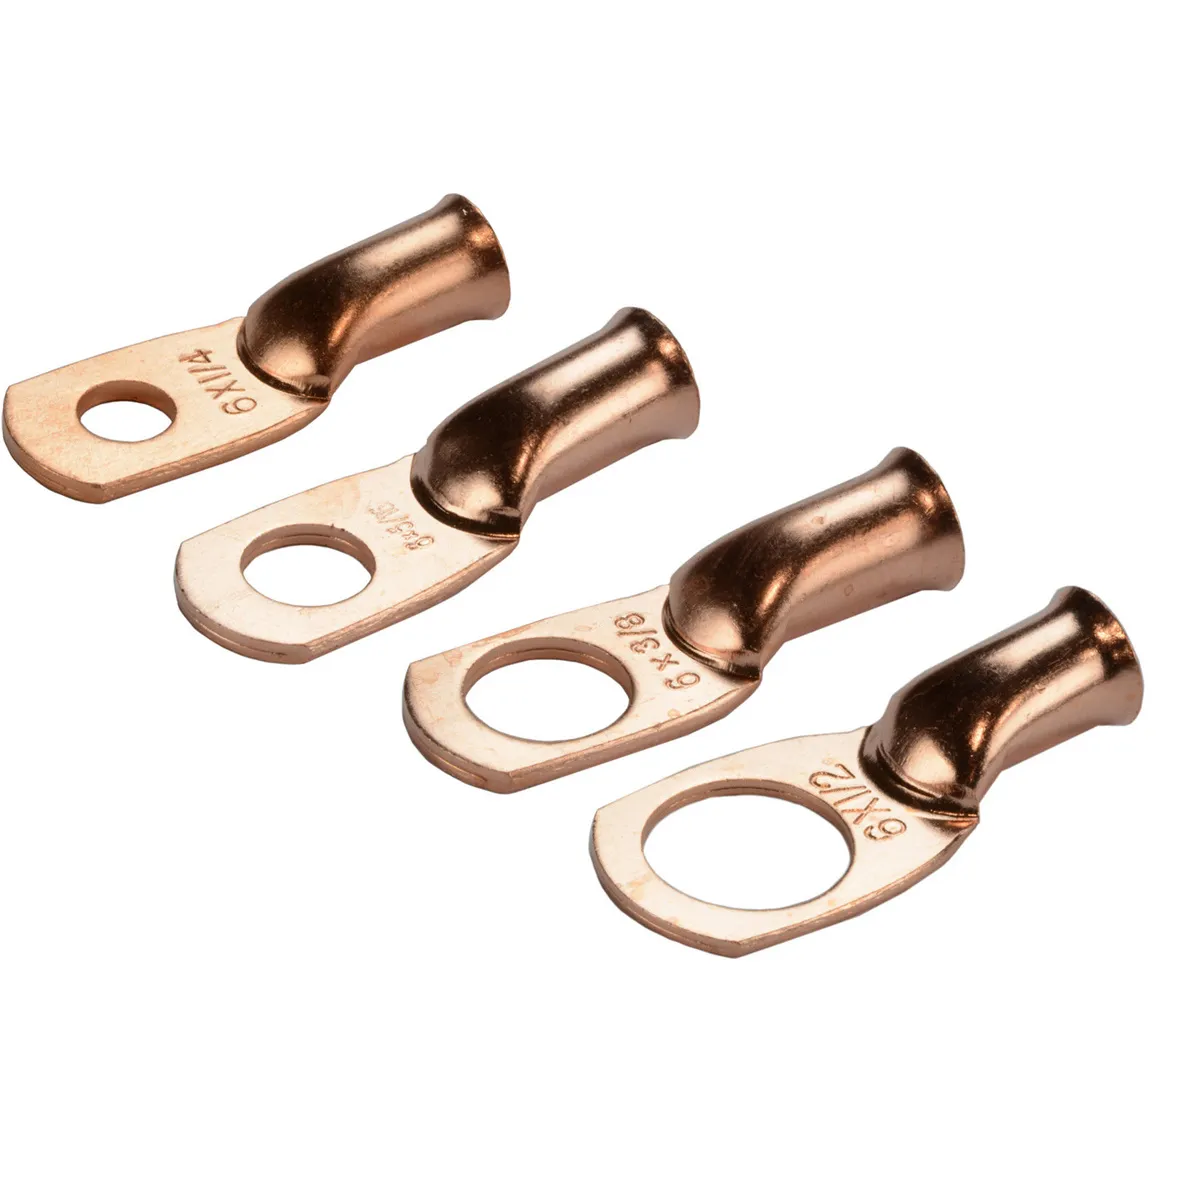 2/6/10/25st 6Awg Bare Copper Ring Terminal Electrical Cable Lugs Eyelet Wire Batterifatter Terminaler Crimp Solded Connector